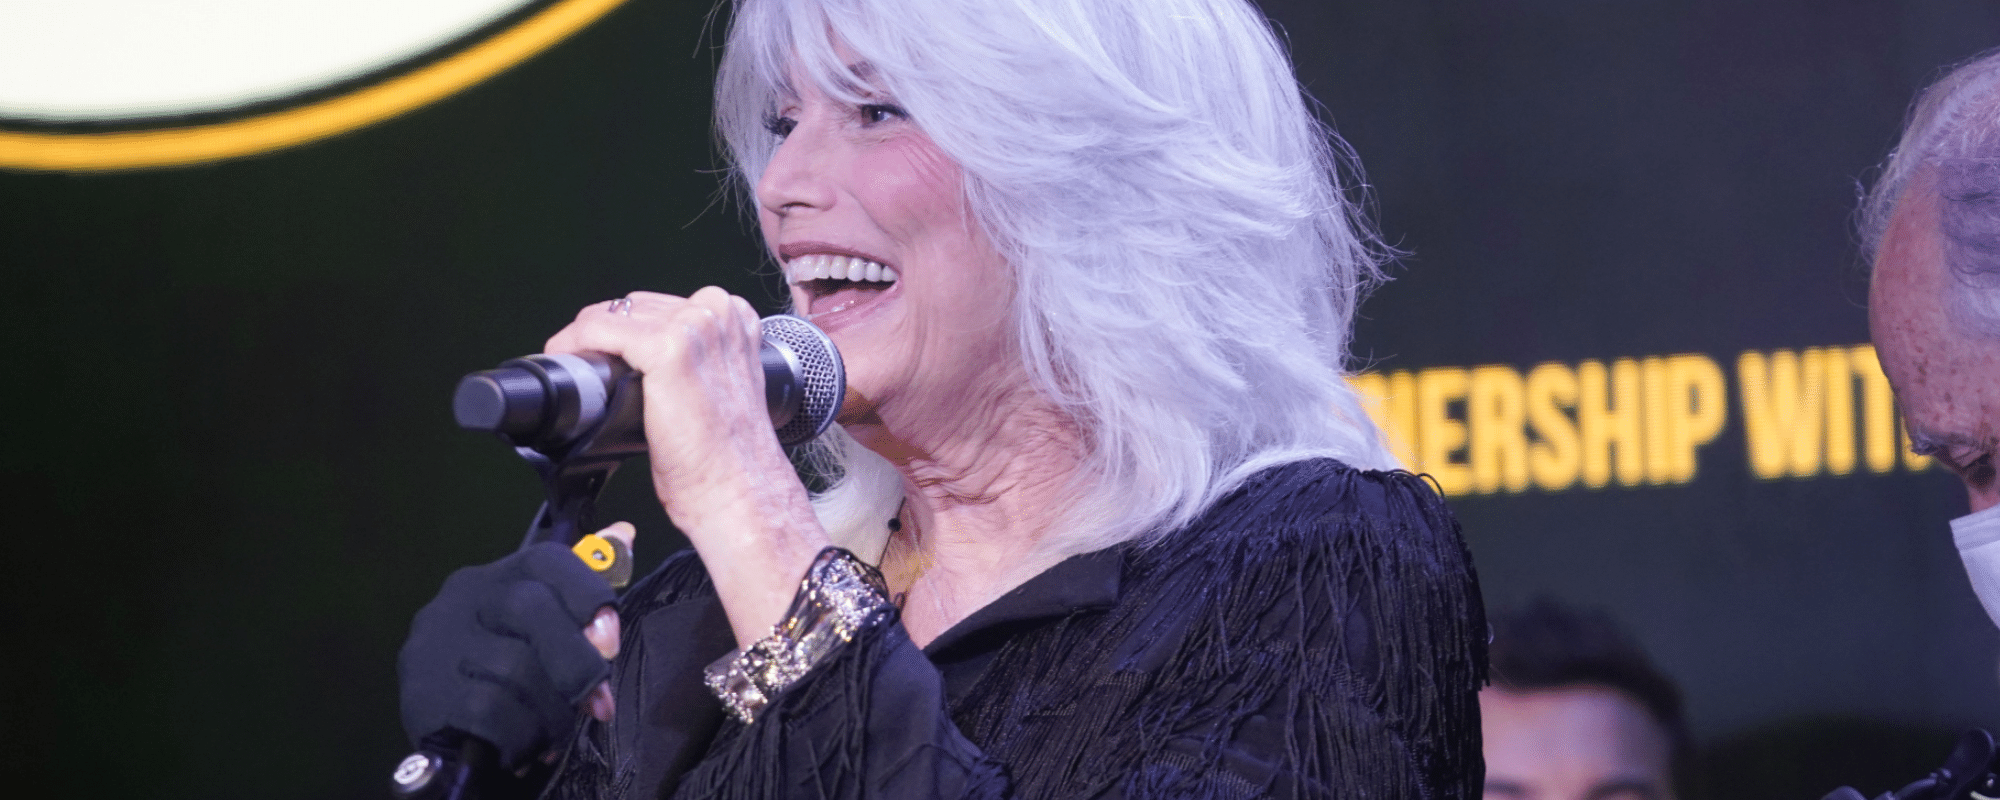 Emmylou Harris, Chris Isaak and More Celebrate 70 Years of Sun Records